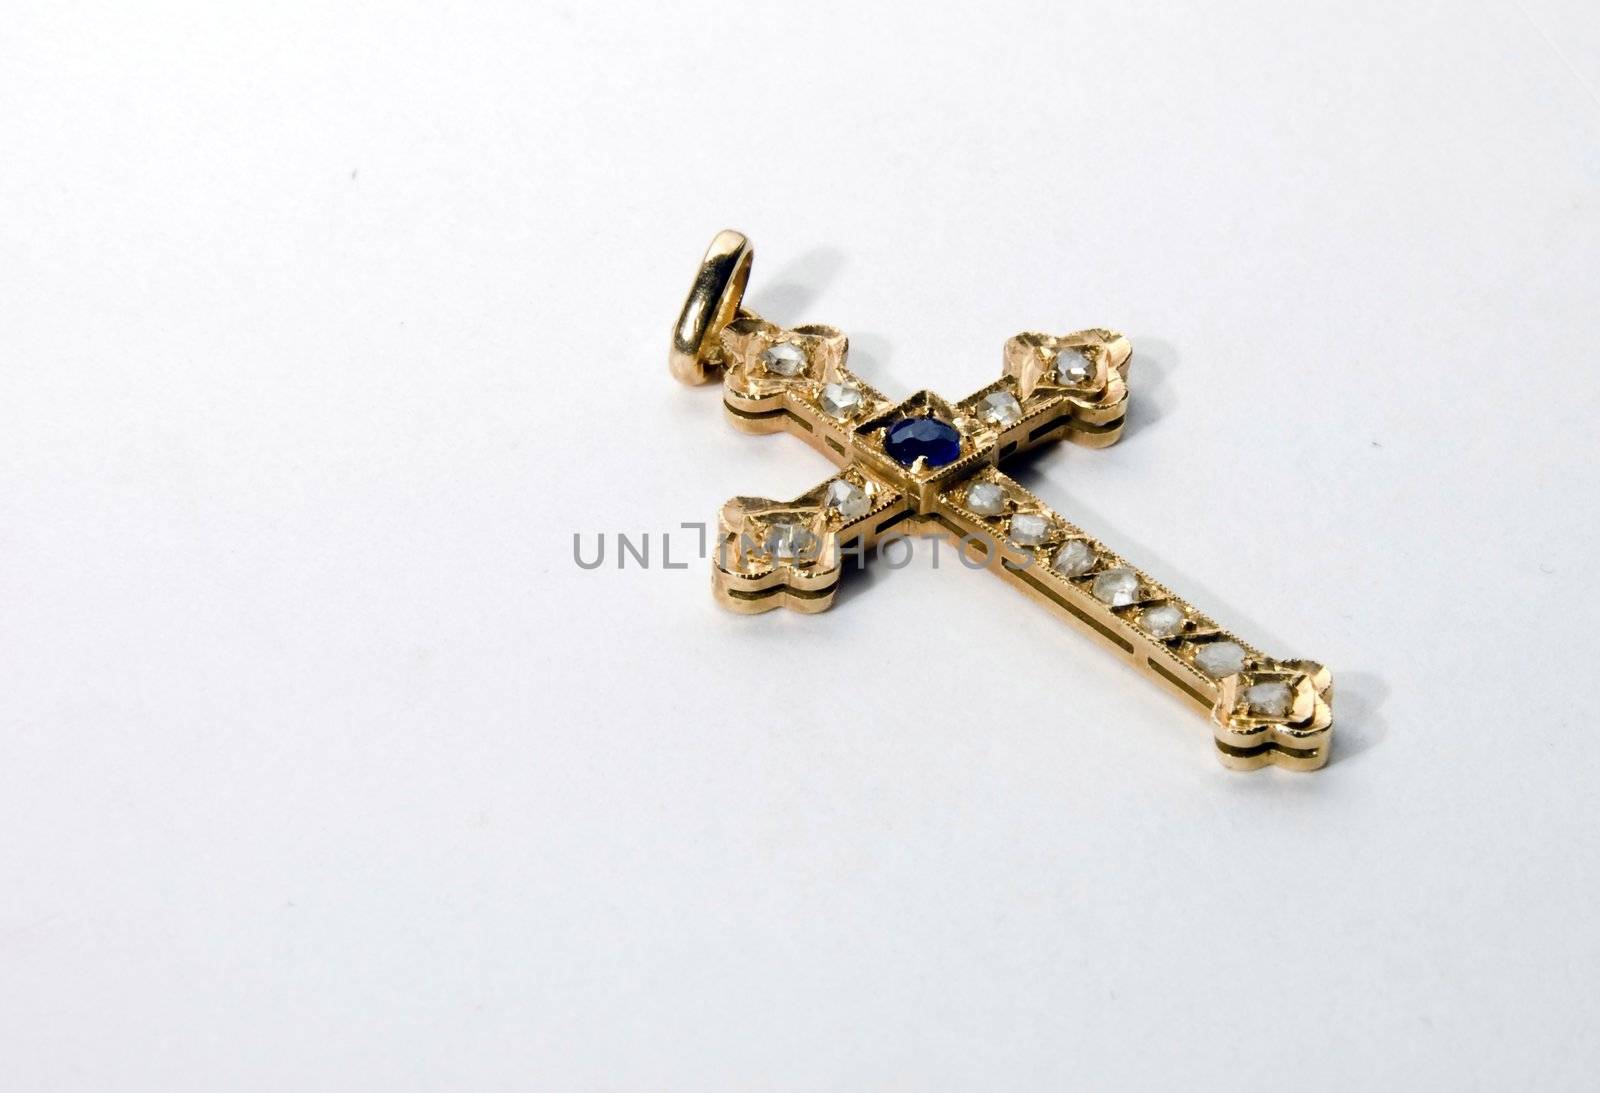 Antique 24ct gold crucifix pendant with inset sapphire and diamonds